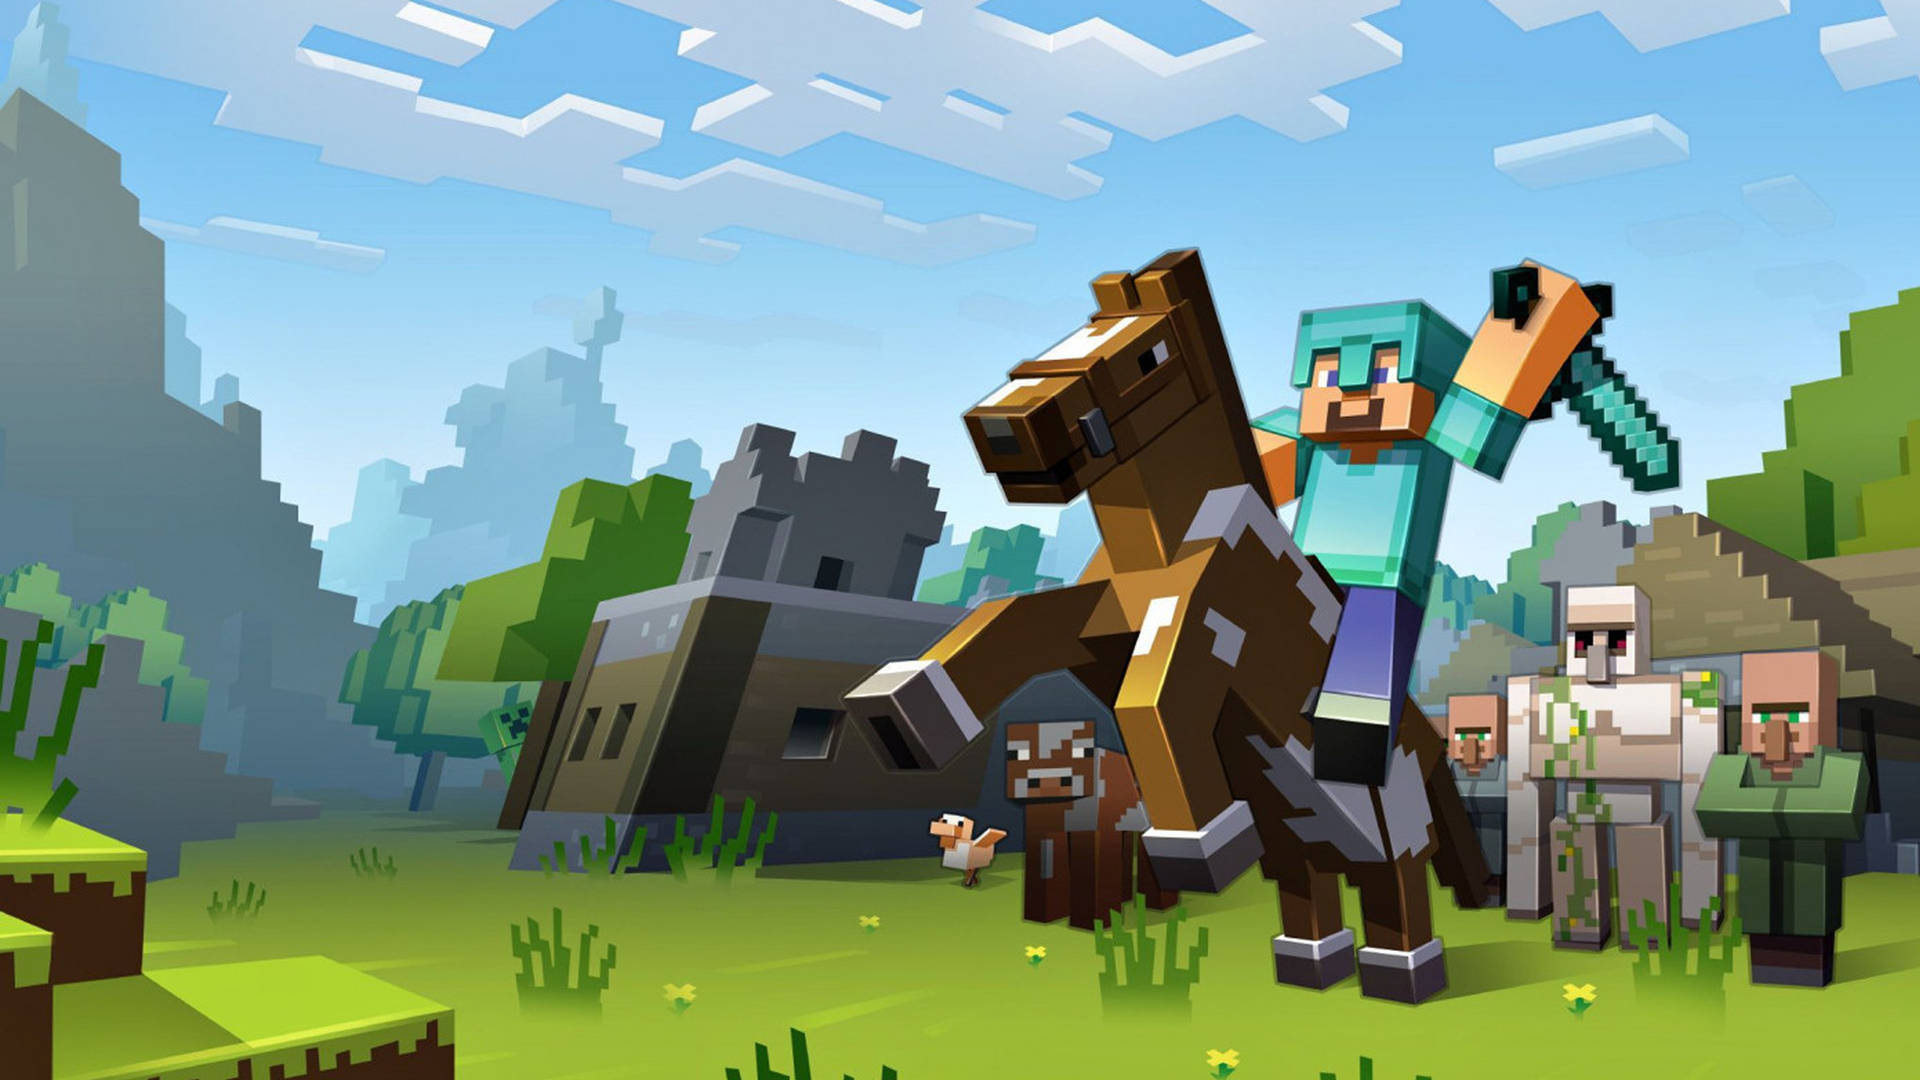 Armored Steve On A Horse 2560x1440 Minecraft Background